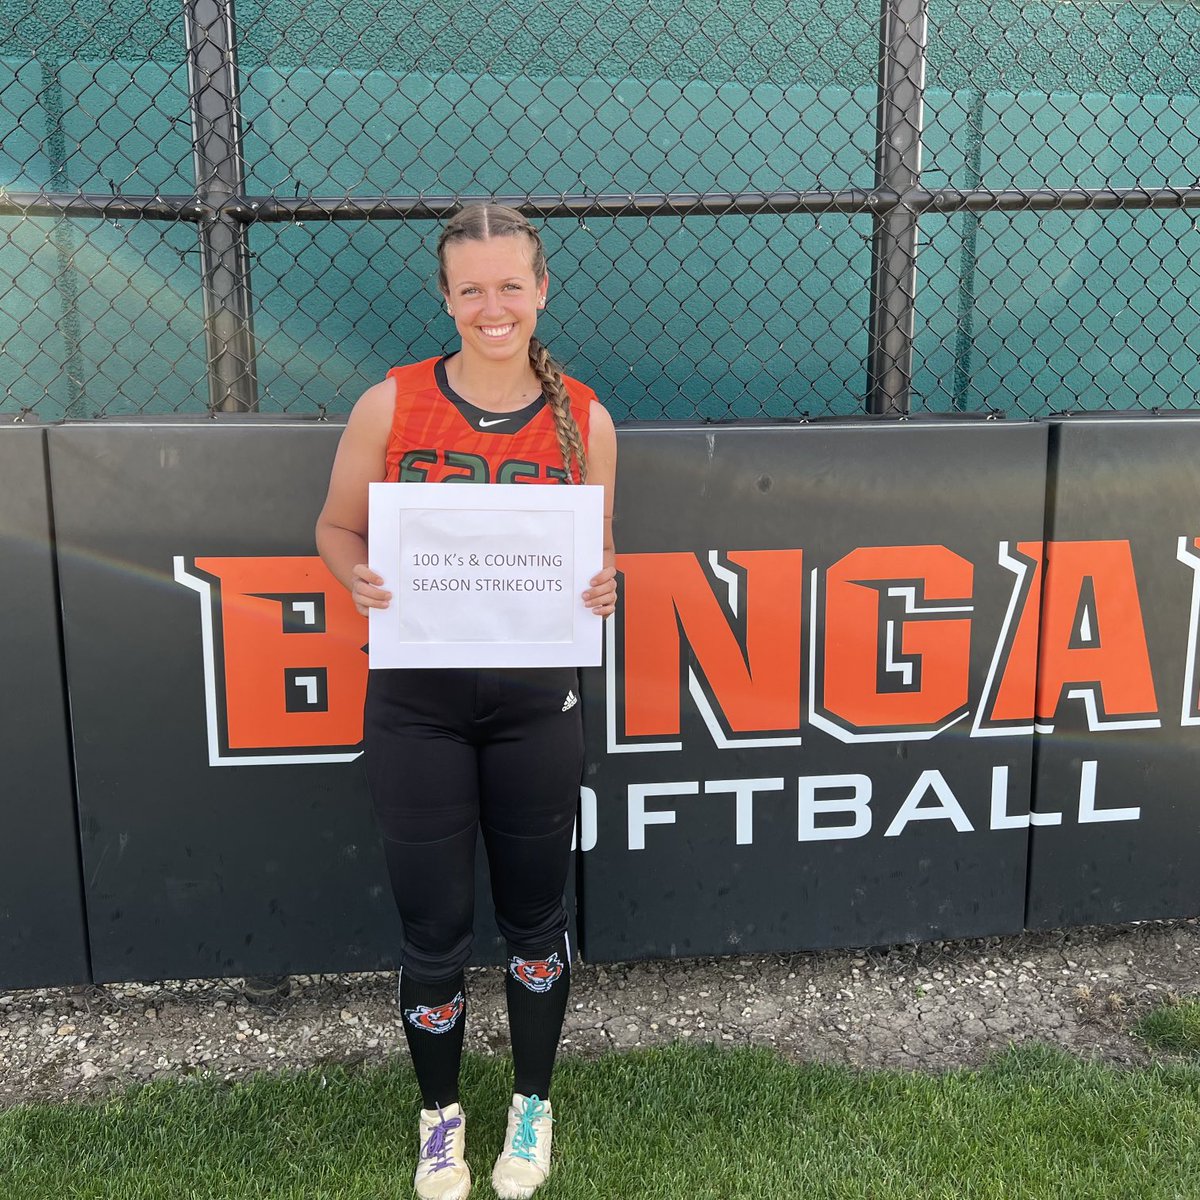 Big accomplishment this week for our sophomore, Avery Welsh. She collected her 100th strikeout of the season. After today’s game she is at 117 strikeouts on the season! #bengalpride 🧡💚🥎